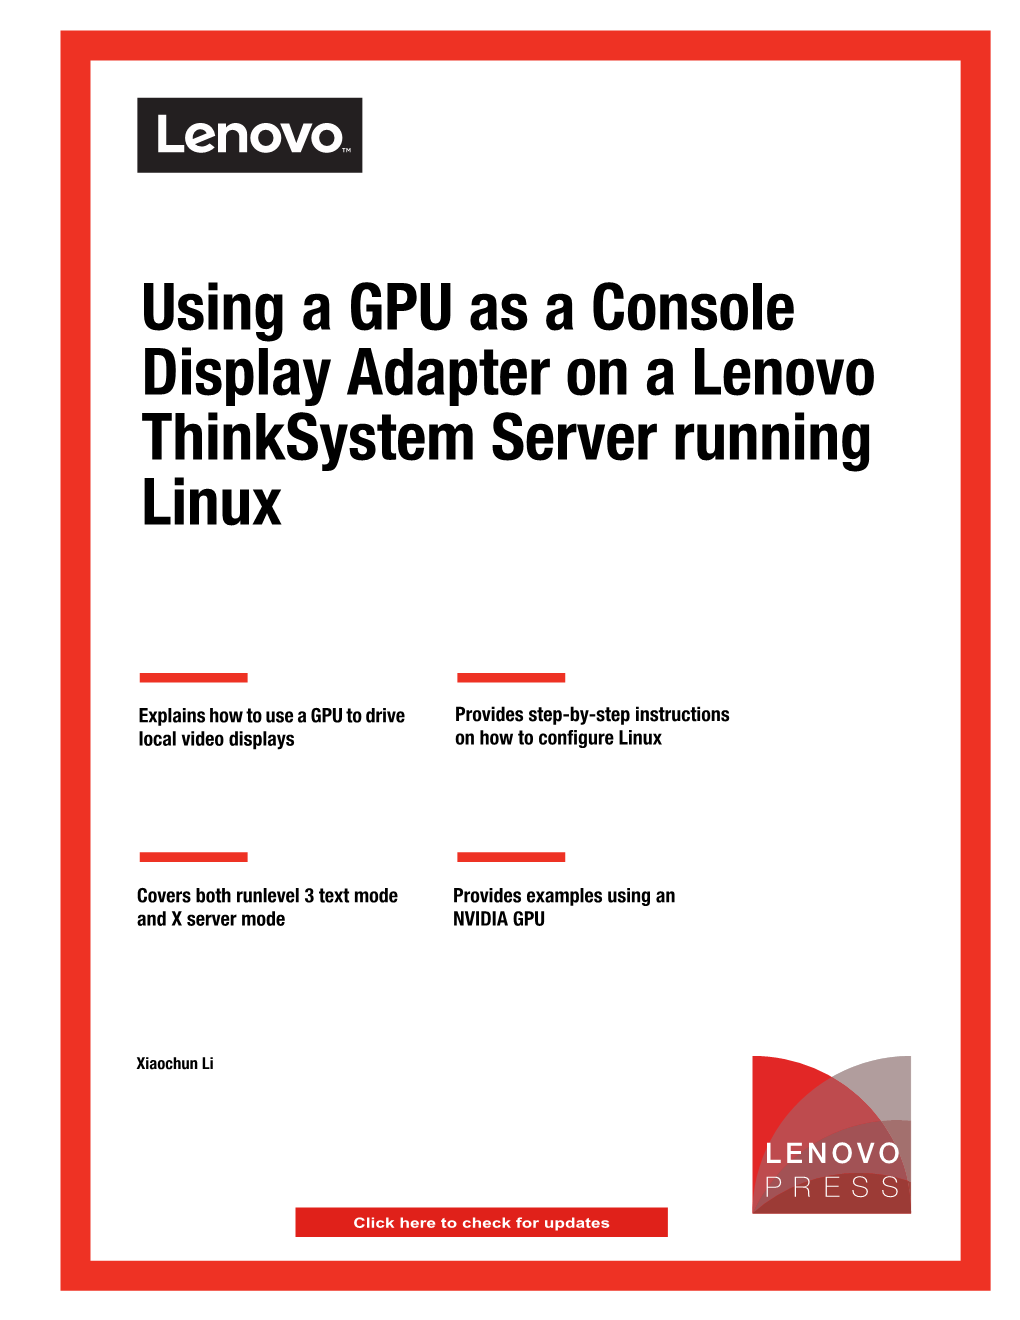 Using a GPU As a Console Display Adapter on a Lenovo Thinksystem Server Running Linux